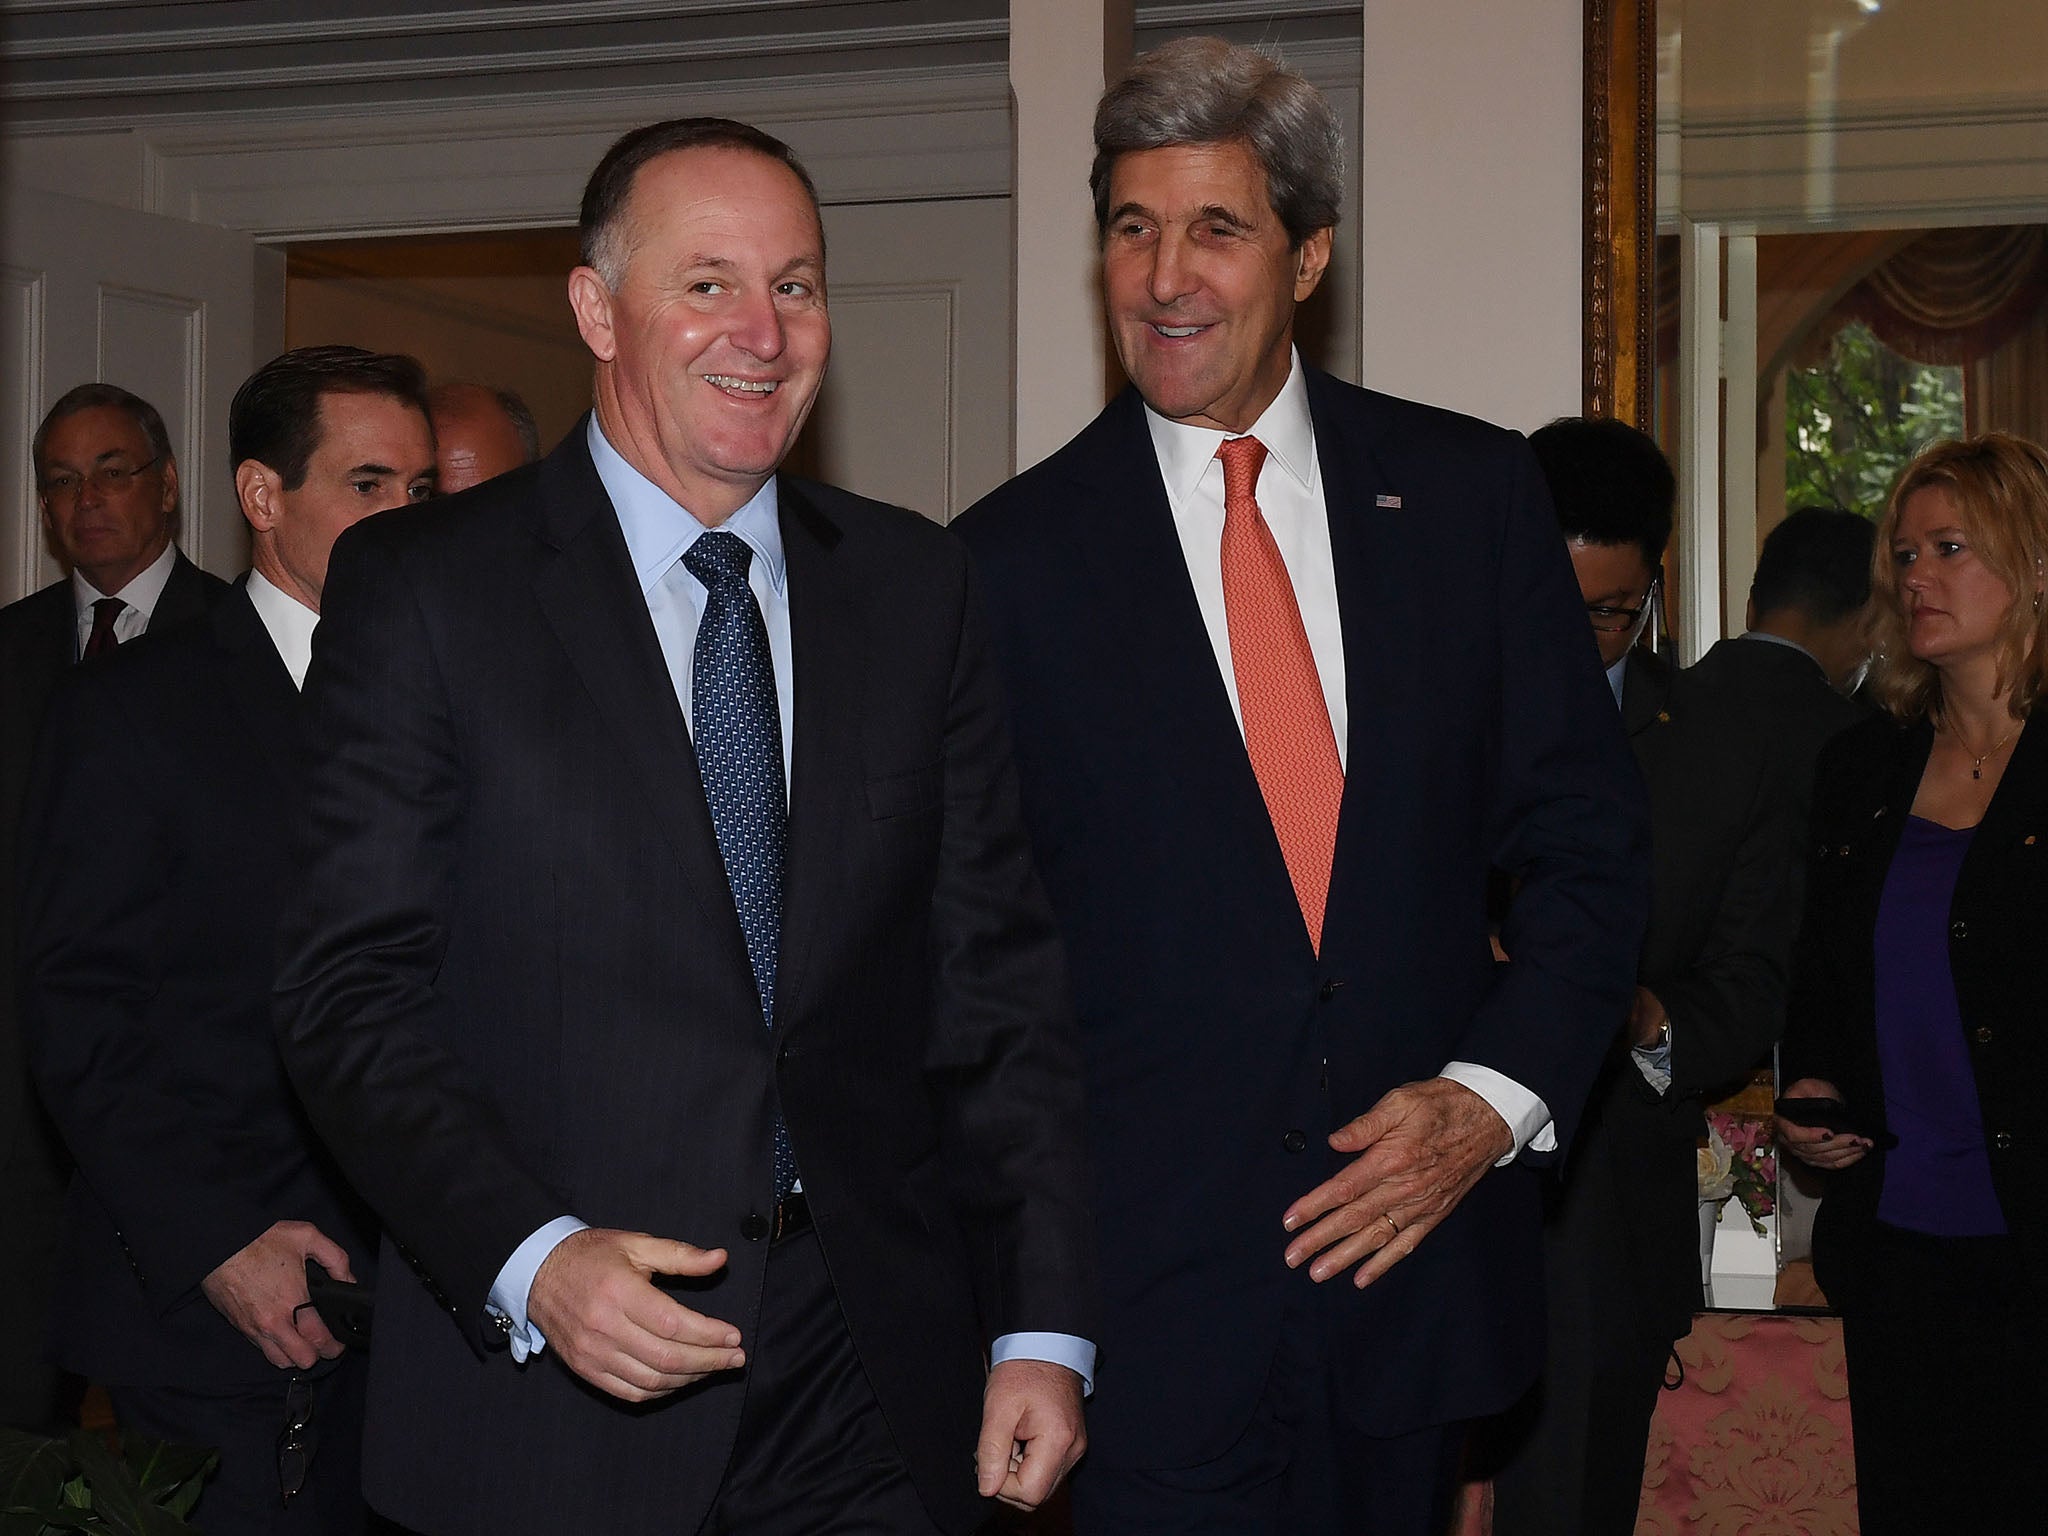 John Key, seen here with US Secretary of State John Kerry has said the 12-nation deal may be saved by making some ‘cosmetic changes’